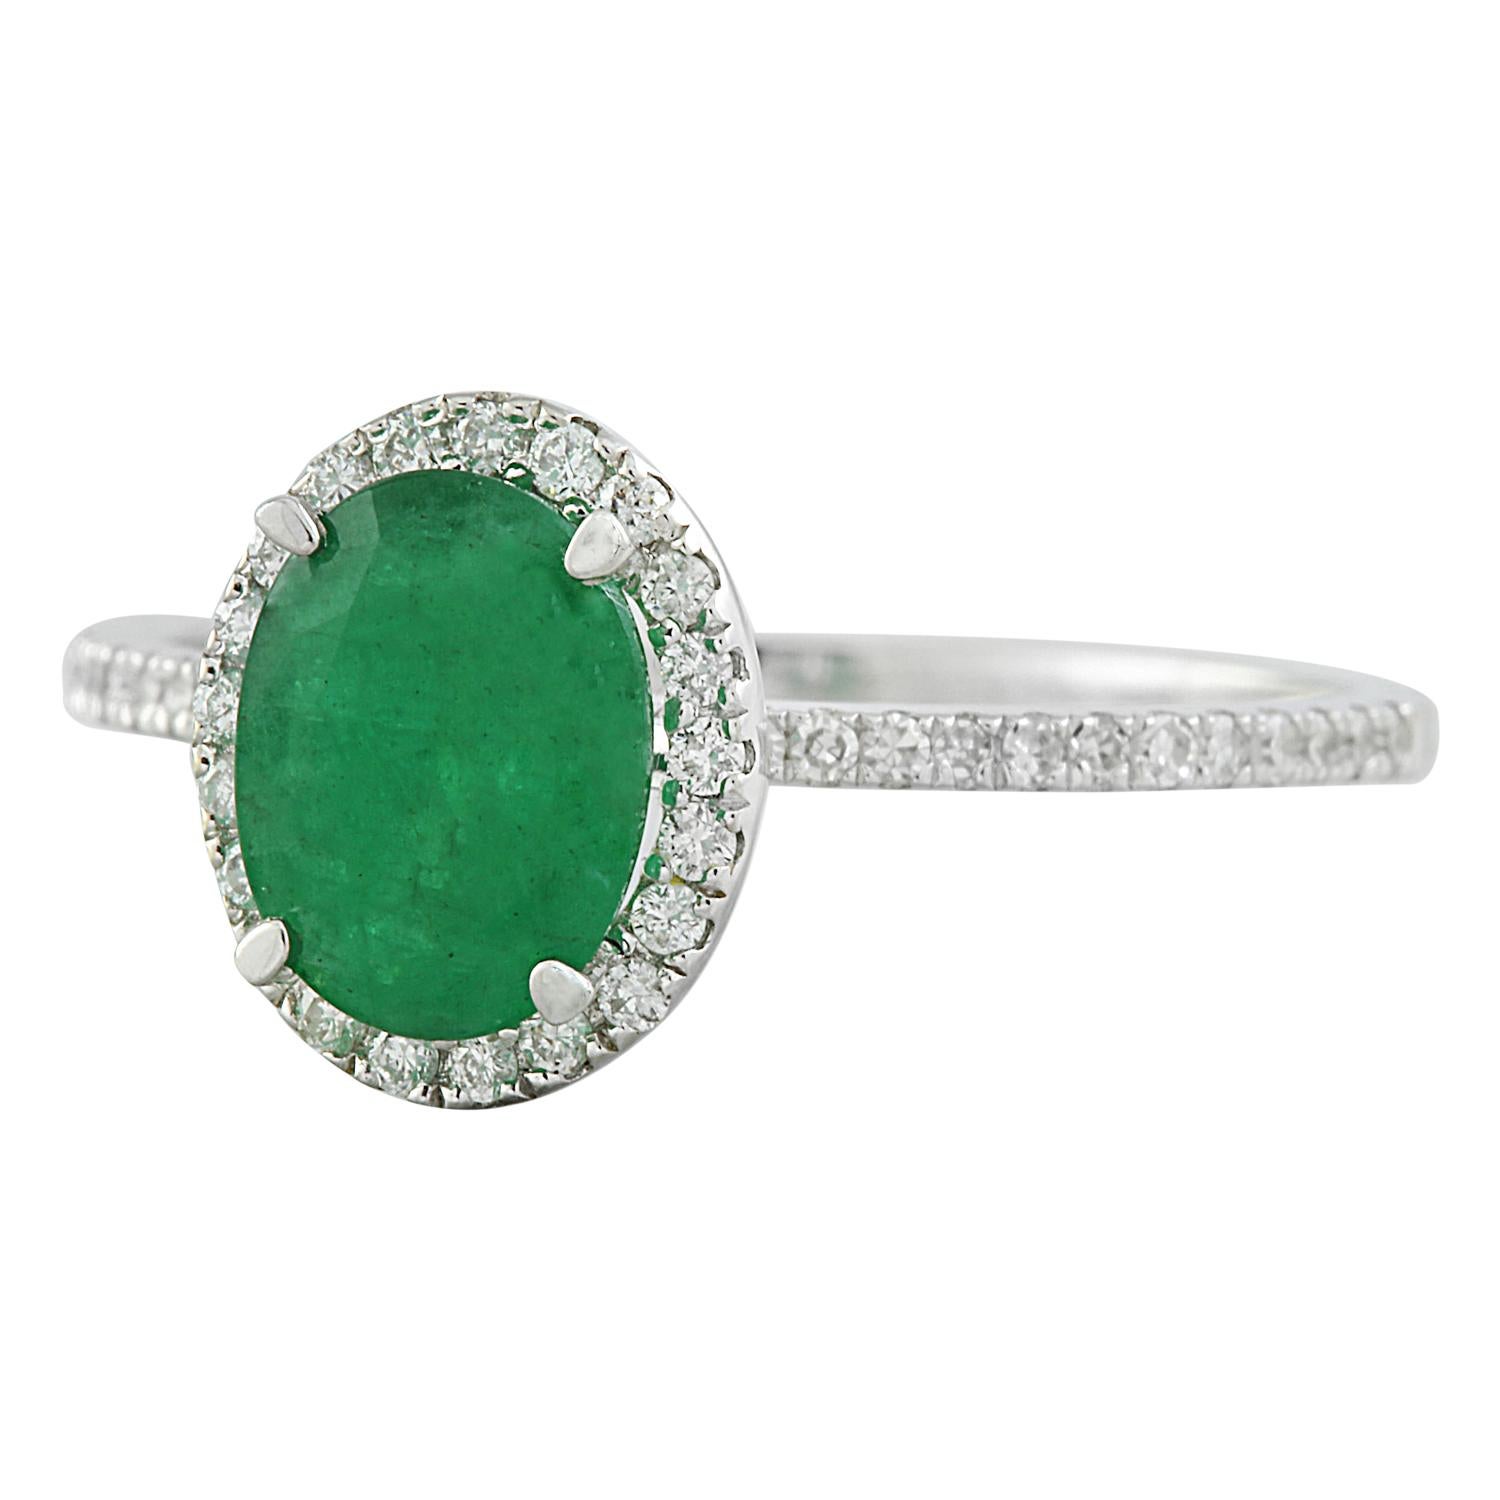 Introducing our stunning 1.49 Carat Natural Emerald 14 Karat Solid White Gold Diamond Ring, a true testament to elegance and sophistication.

Crafted with exquisite detail, this ring is stamped with 14K authenticity, boasting a total weight of 1.6